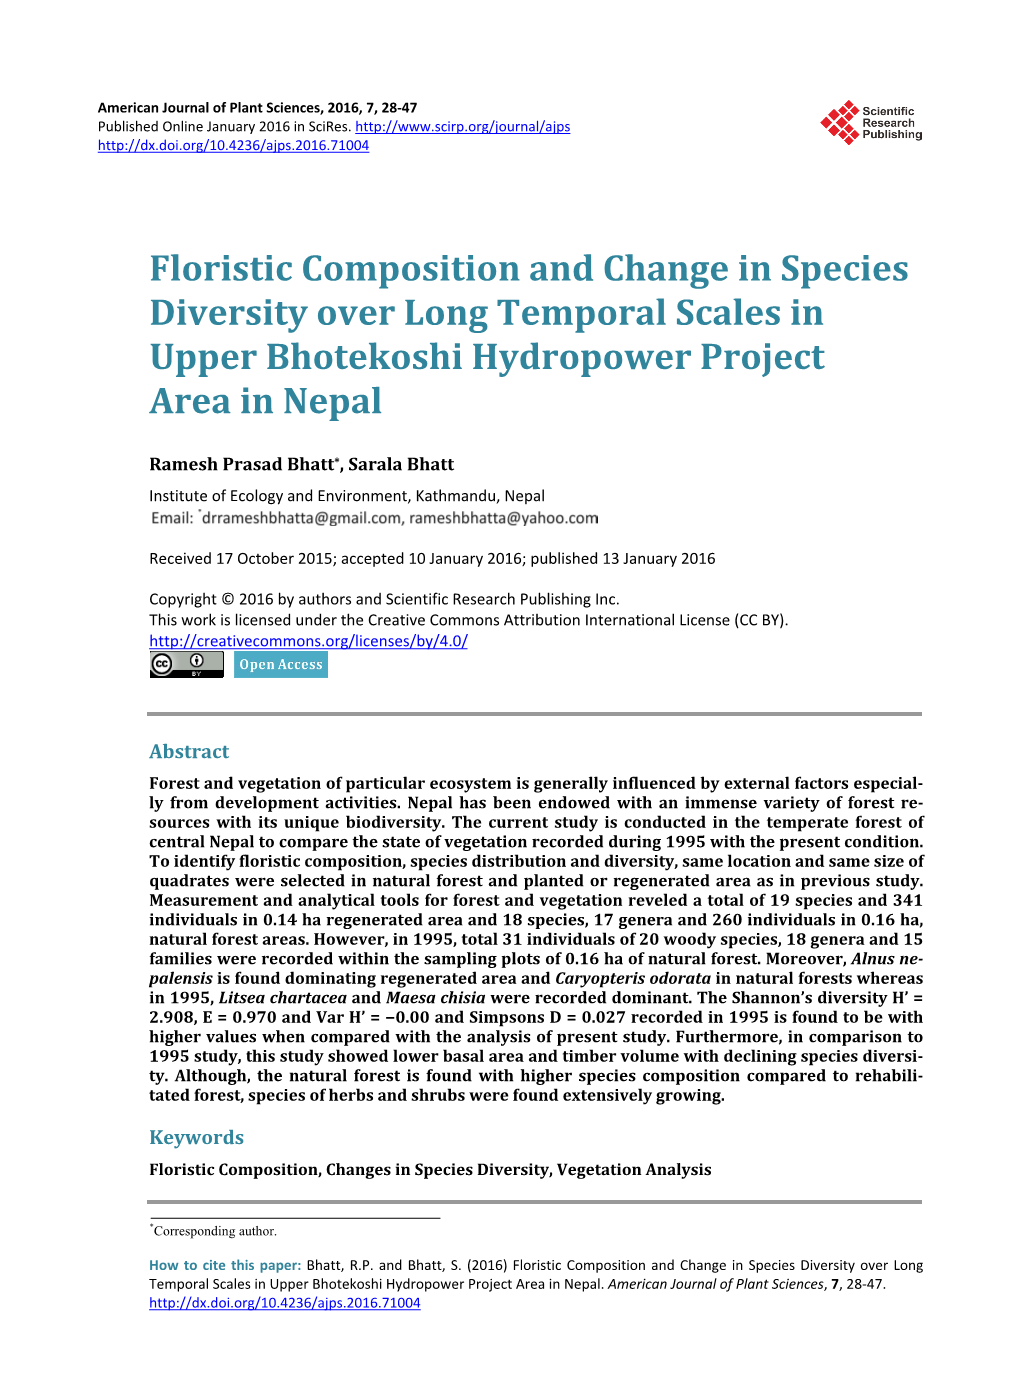 Floristic Composition and Change in Species Diversity Over Long Temporal Scales in Upper Bhotekoshi Hydropower Project Area in Nepal